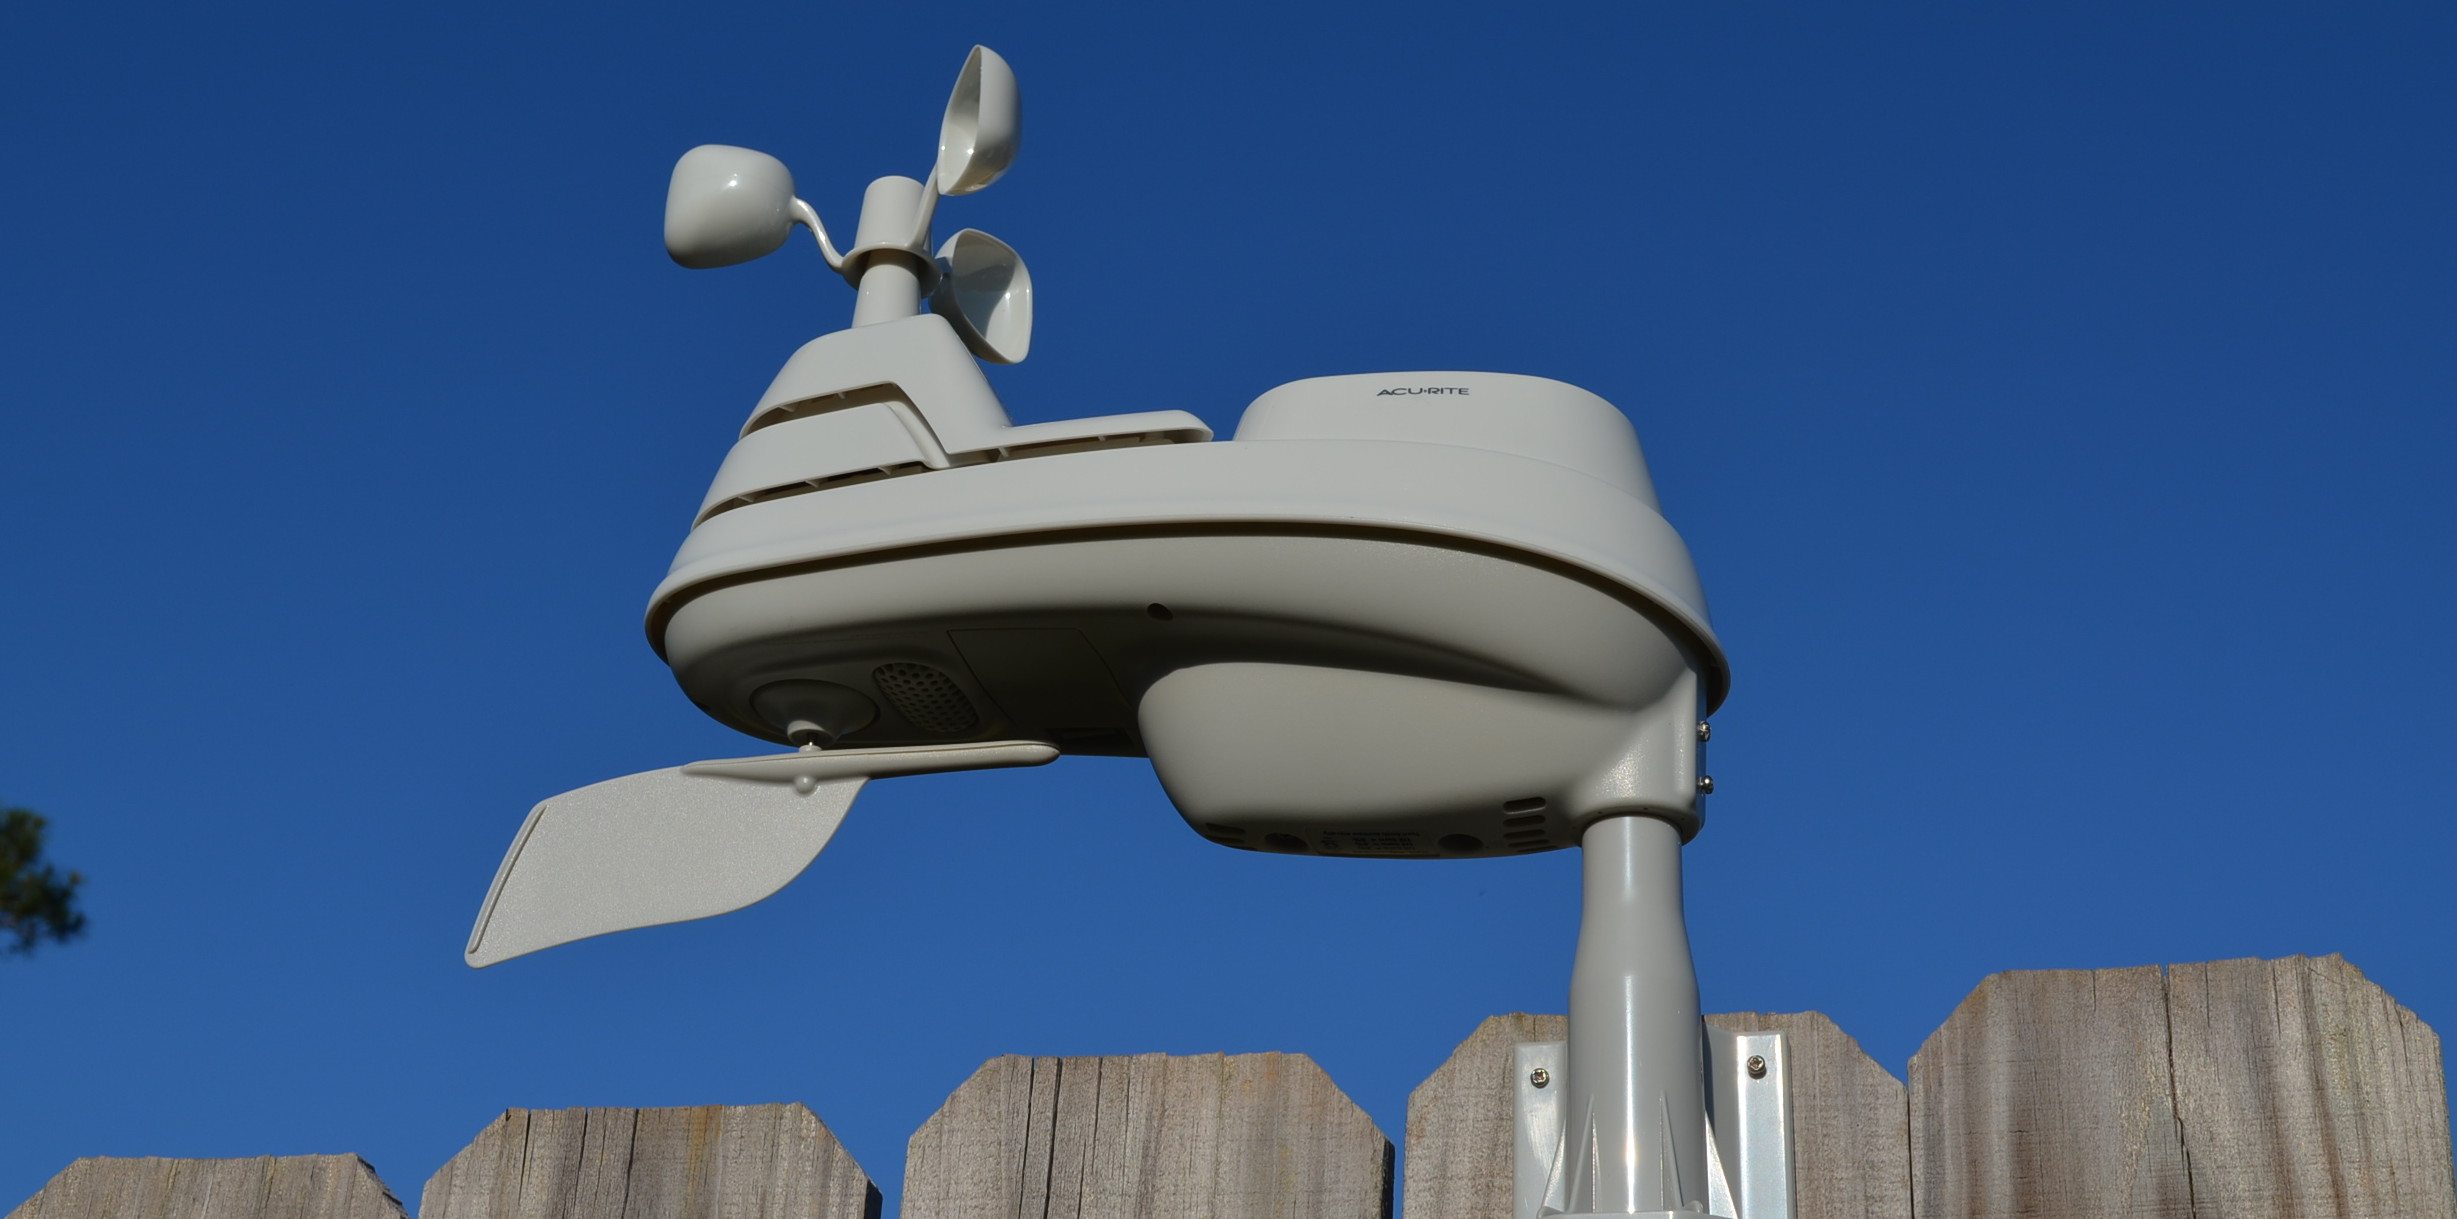 Geek out on weather with an Oregon Scientific weather station for